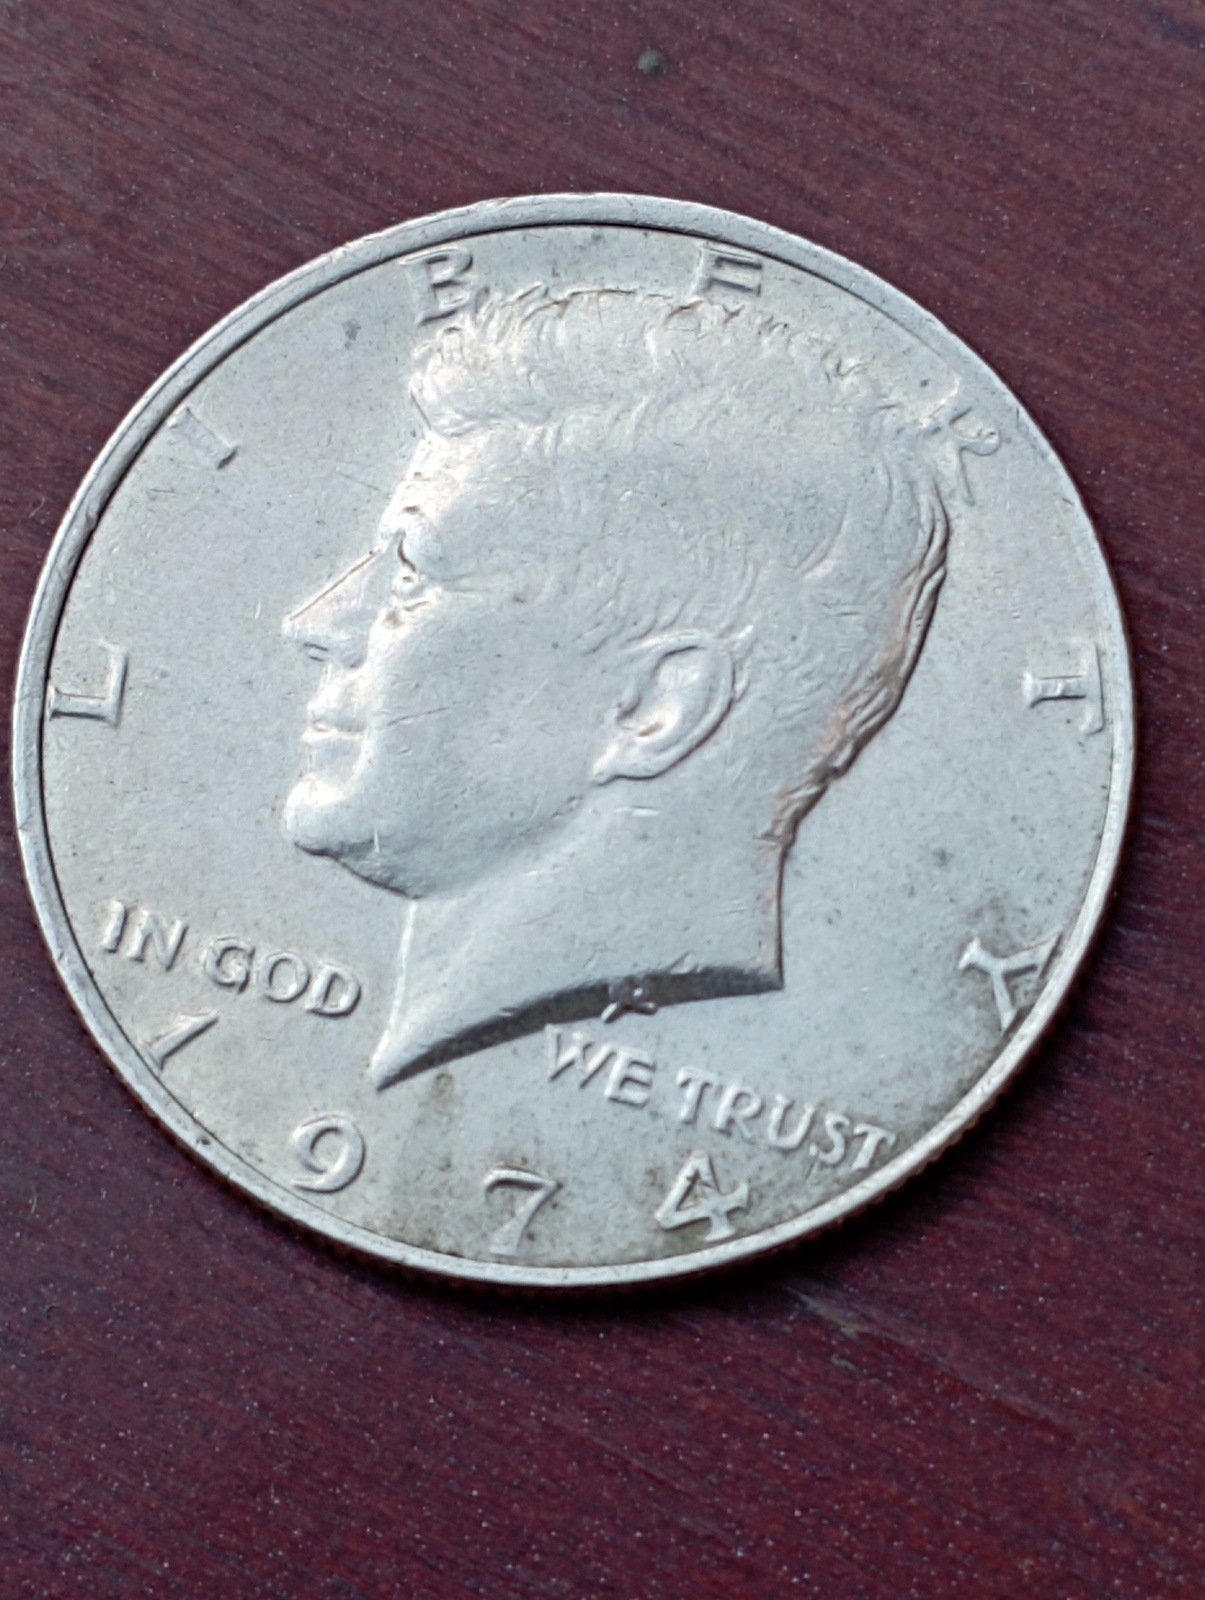 Primary image for Half Dollar Kennedy 1974 no mint